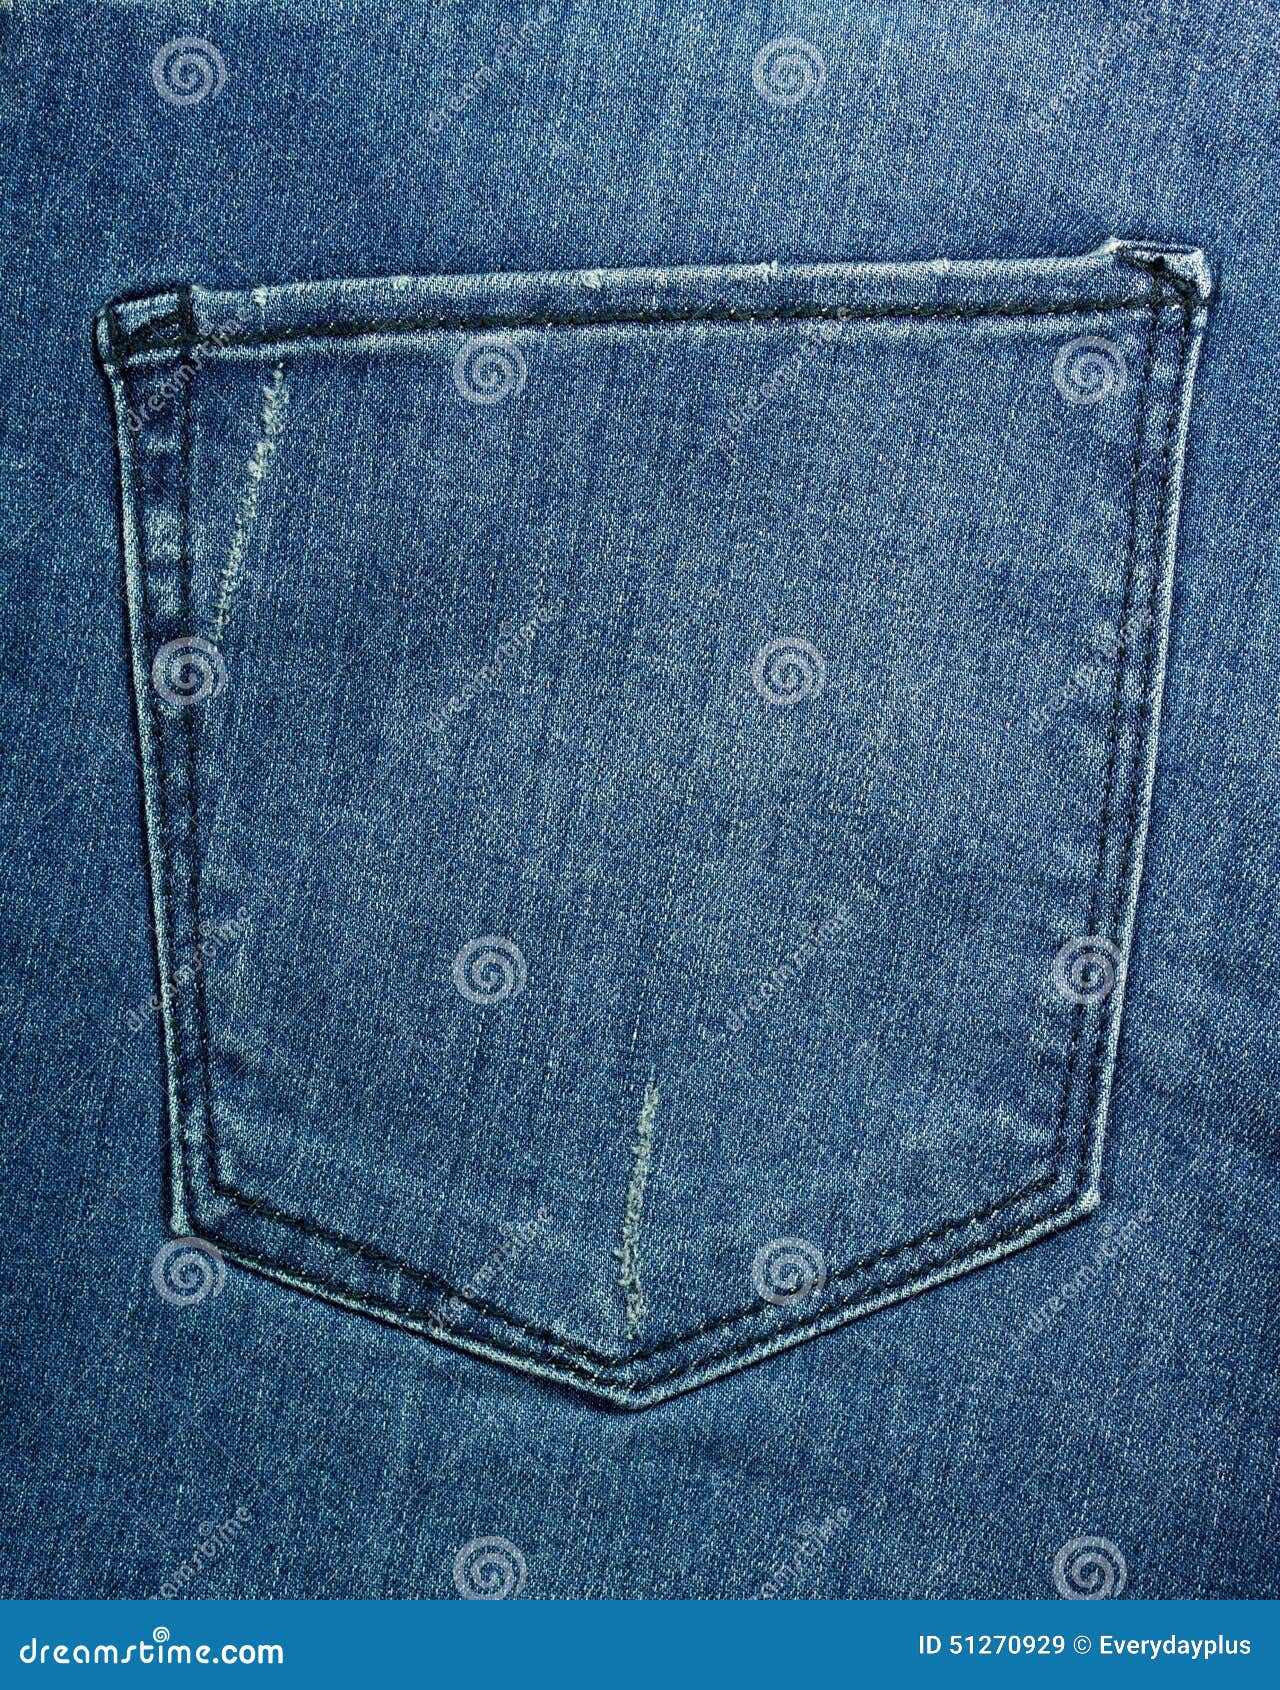 Jean pocket texture stock image. Image of blue, textured - 51270929